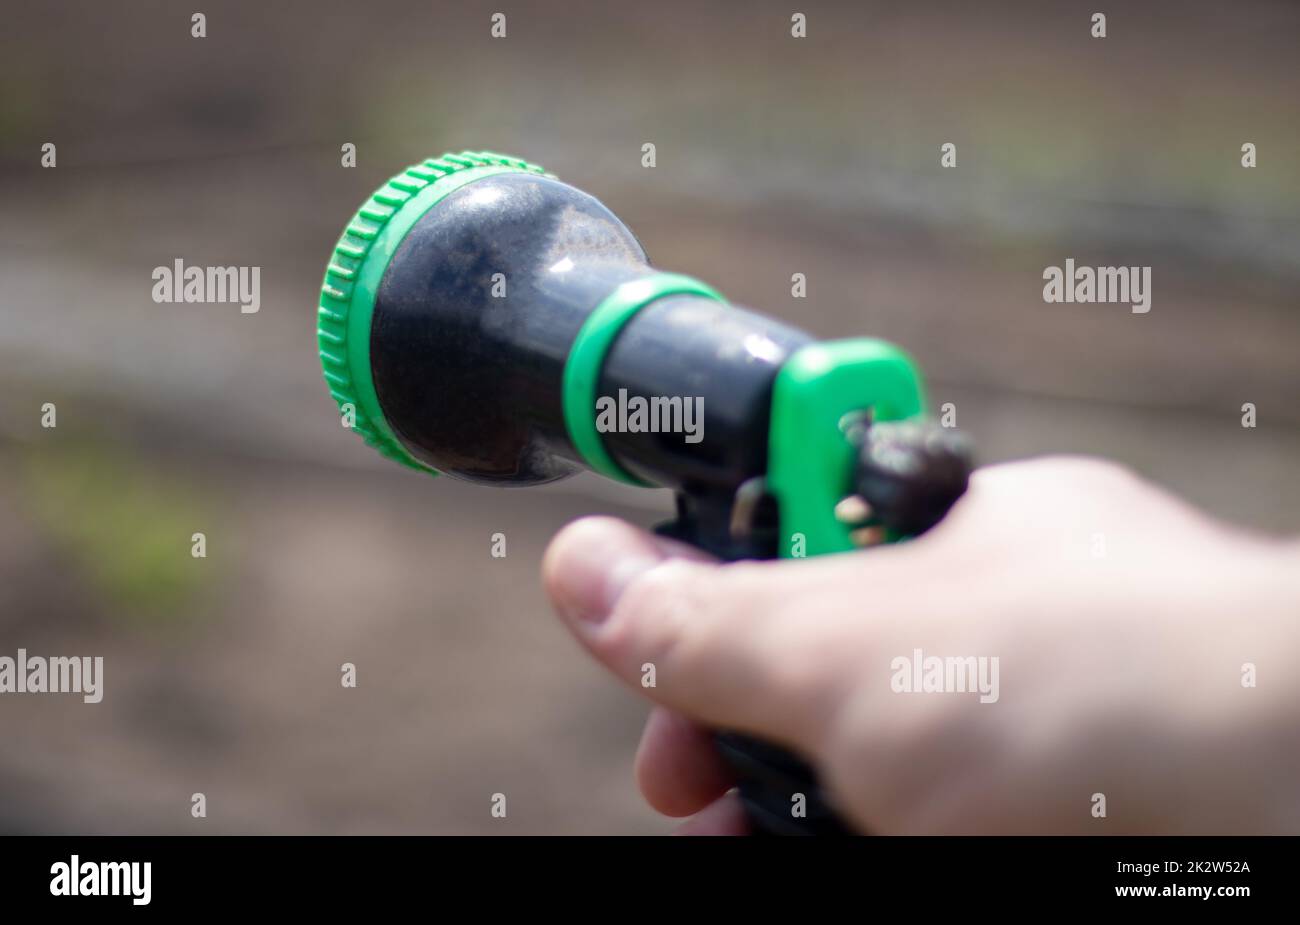 The gardener's hand holds a hose with a sprayer and waters the plants in the garden. Green atomizer in hand with a large lan. Horticulture hobby concept. Watering with a hose. Stock Photo